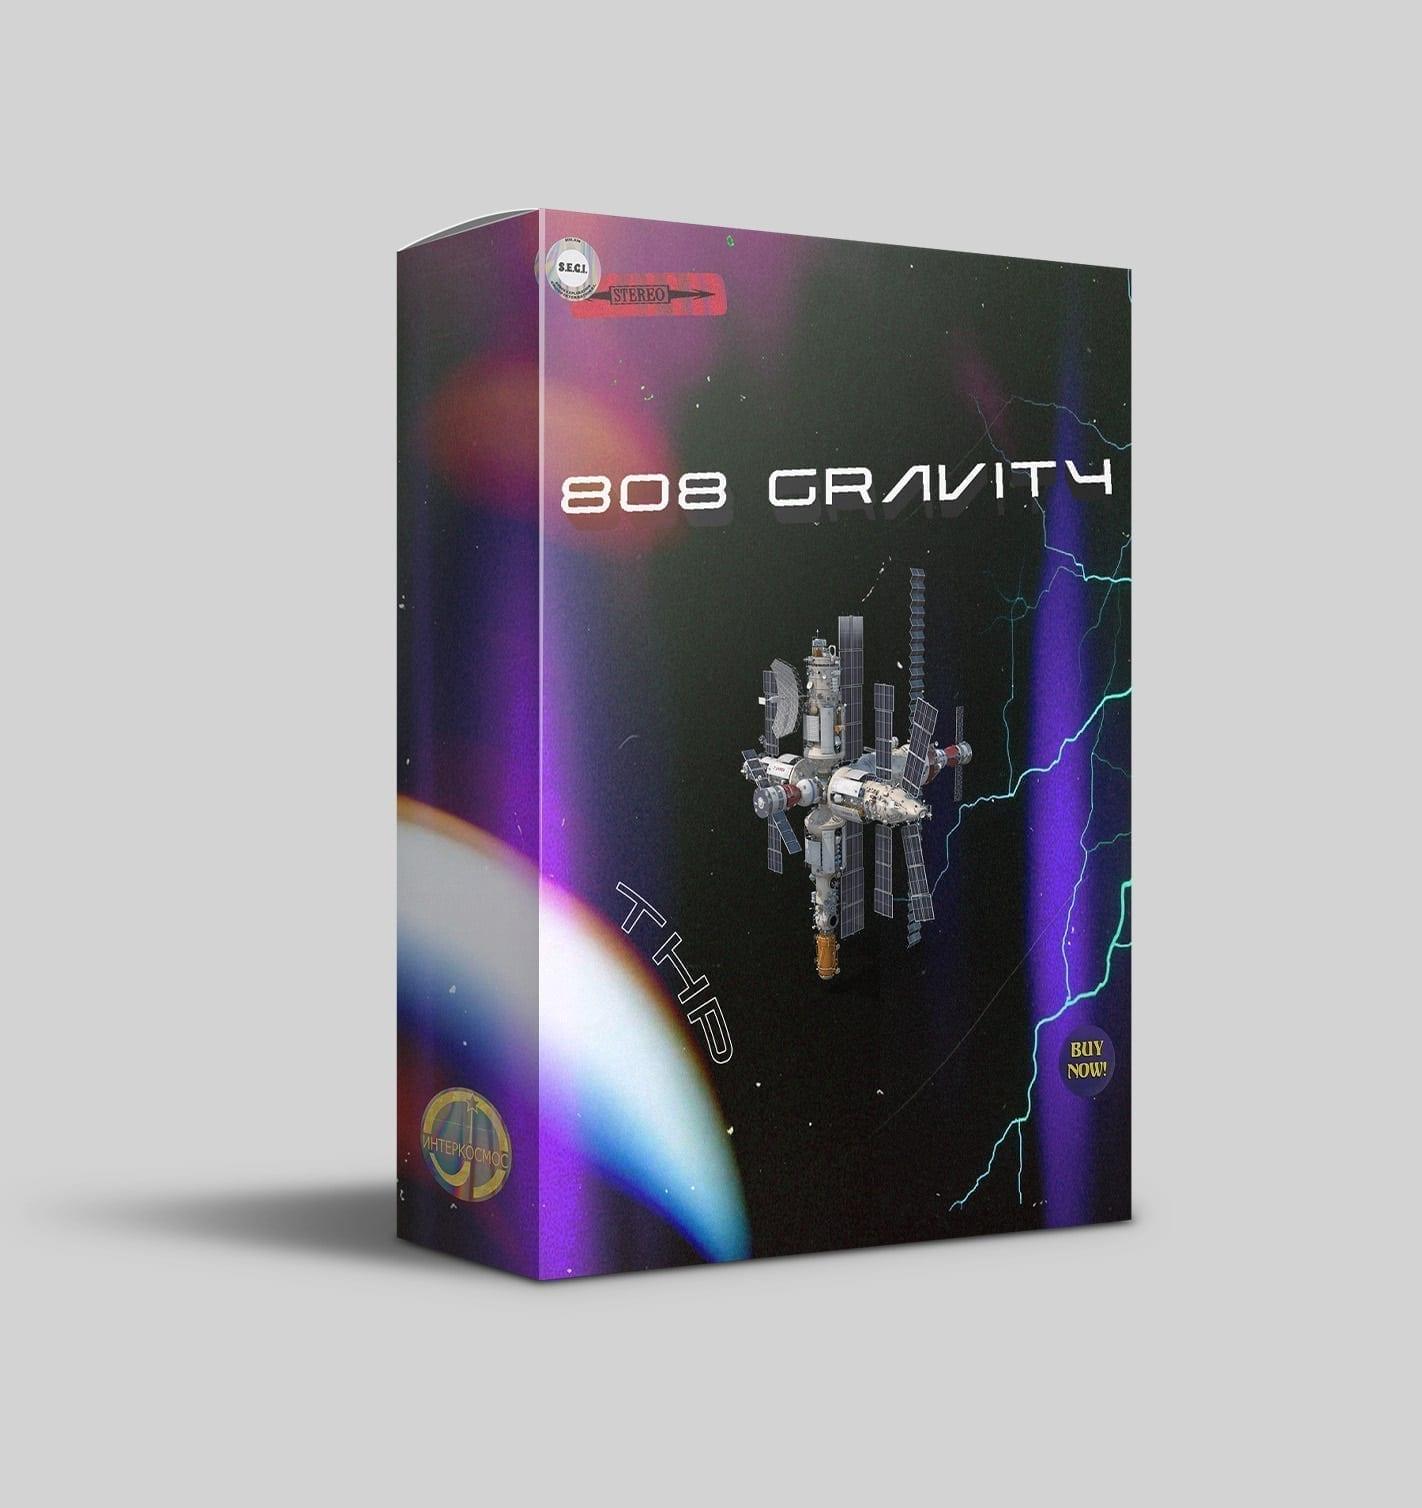 THP - 808 Gravity (808 Massive Presets) - The Highest Producers